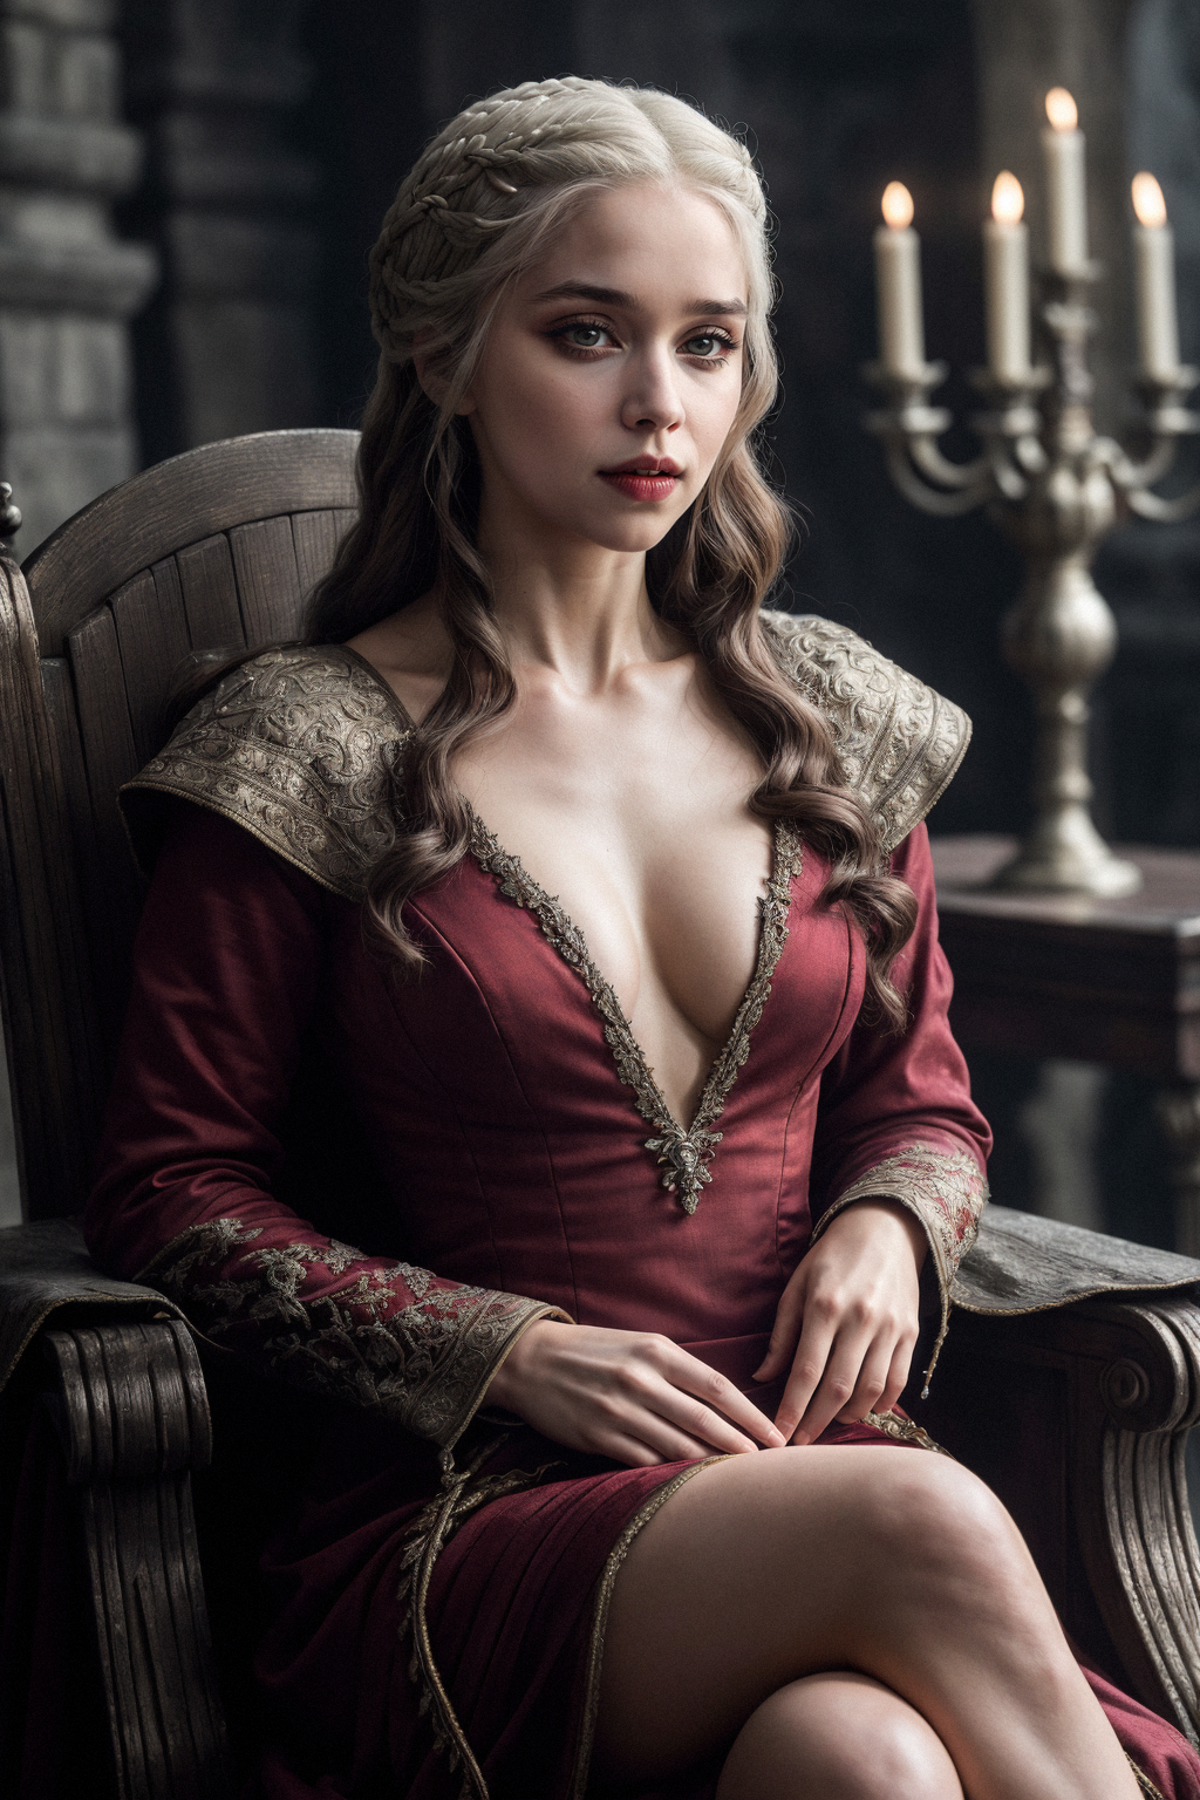 A woman in a red dress sitting in a wooden chair.